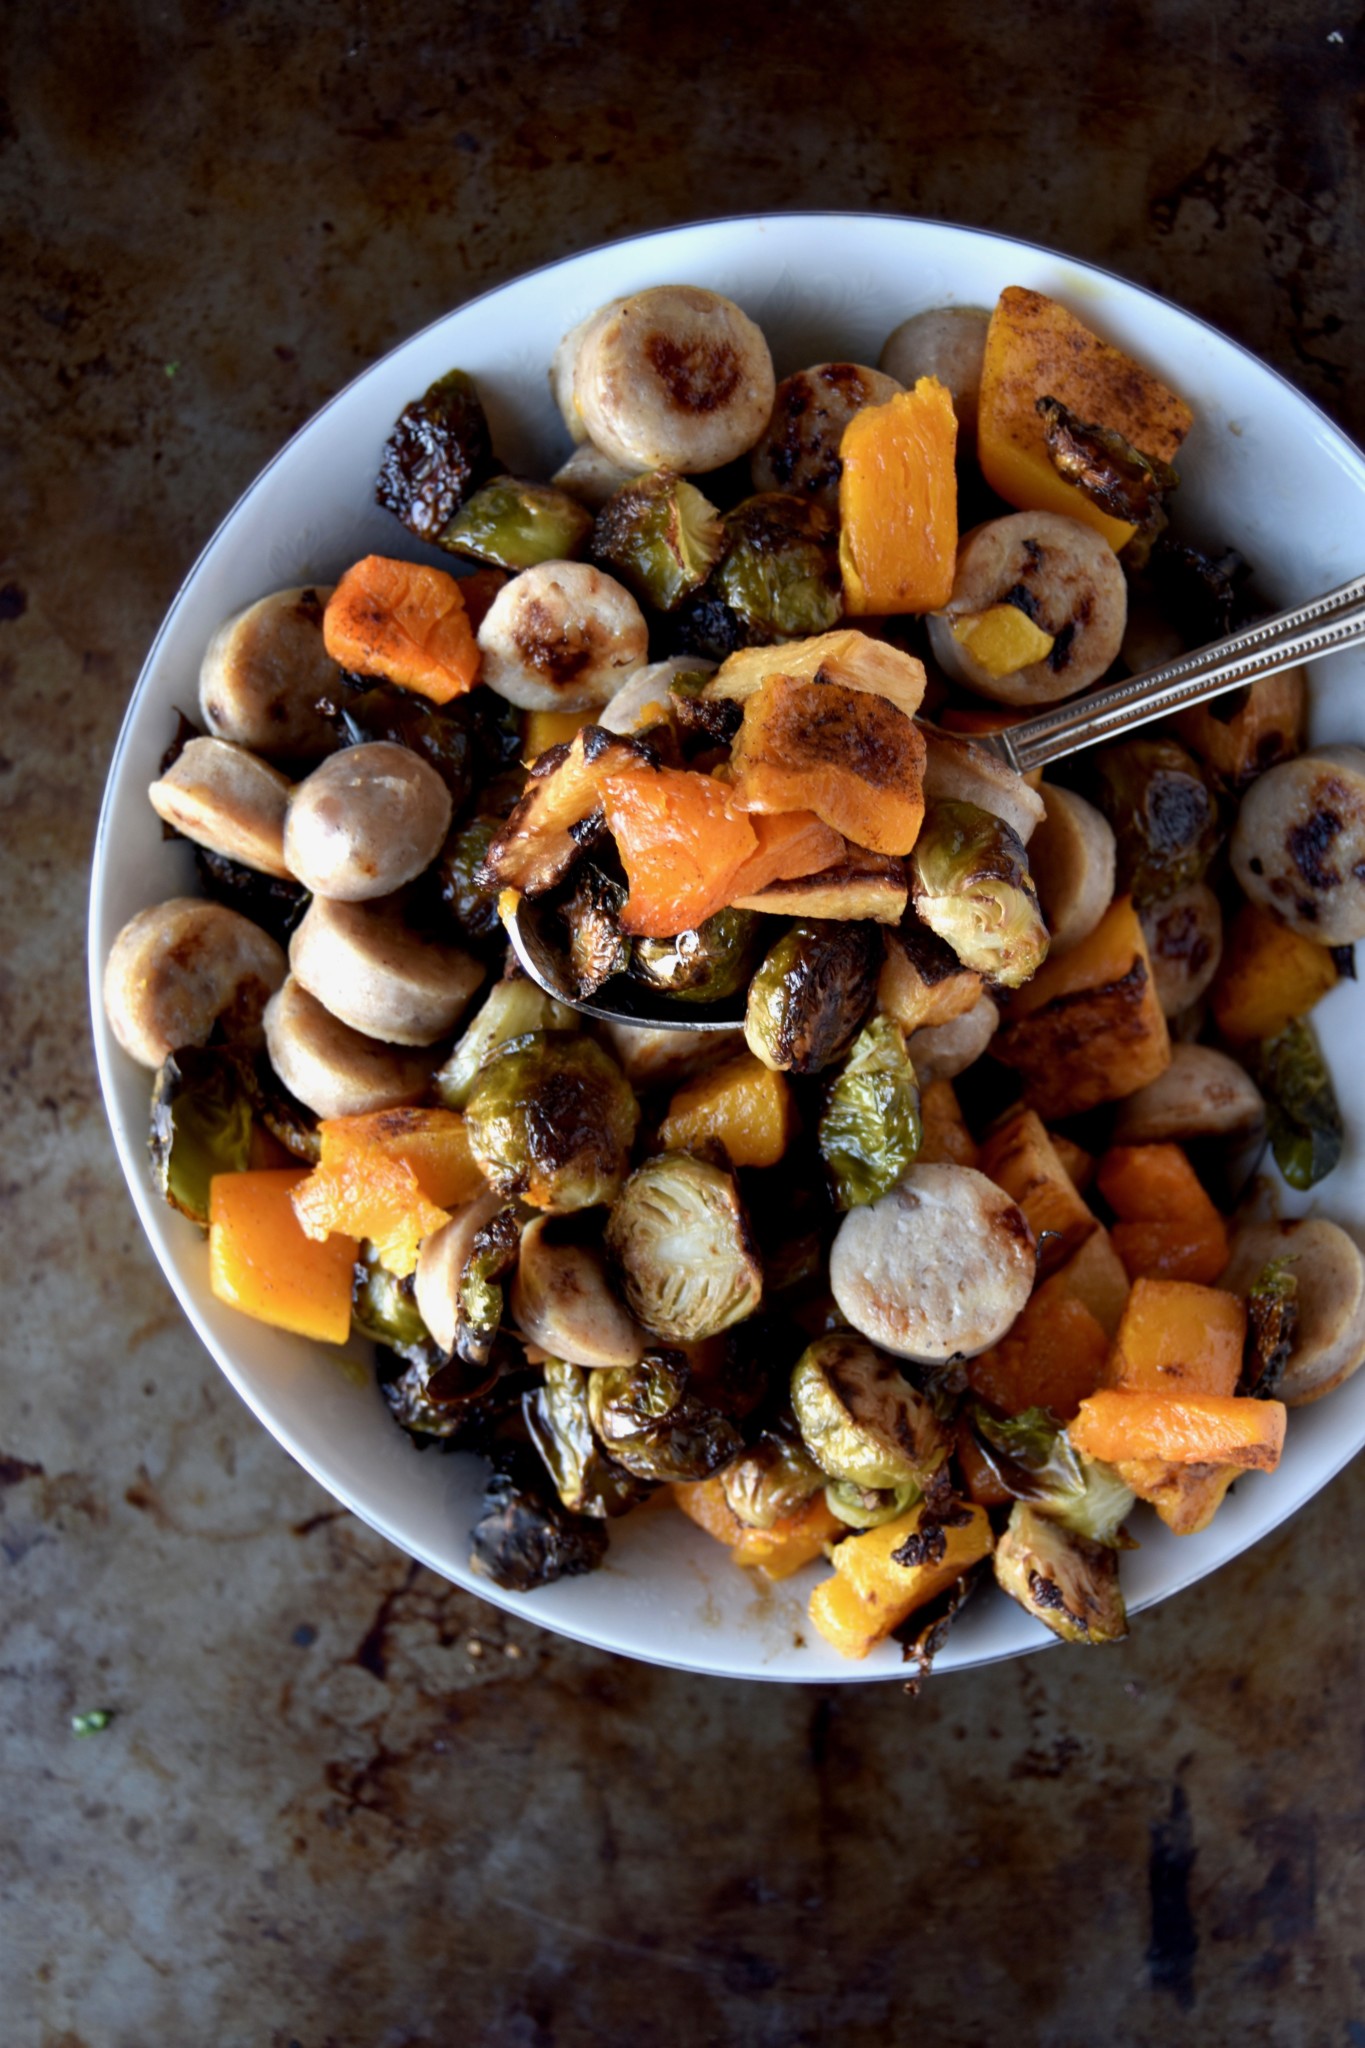 harvest roasted root vegetables and chicken apple sausage - a fully roasted dinner packed with veggies and protein // cait's plate